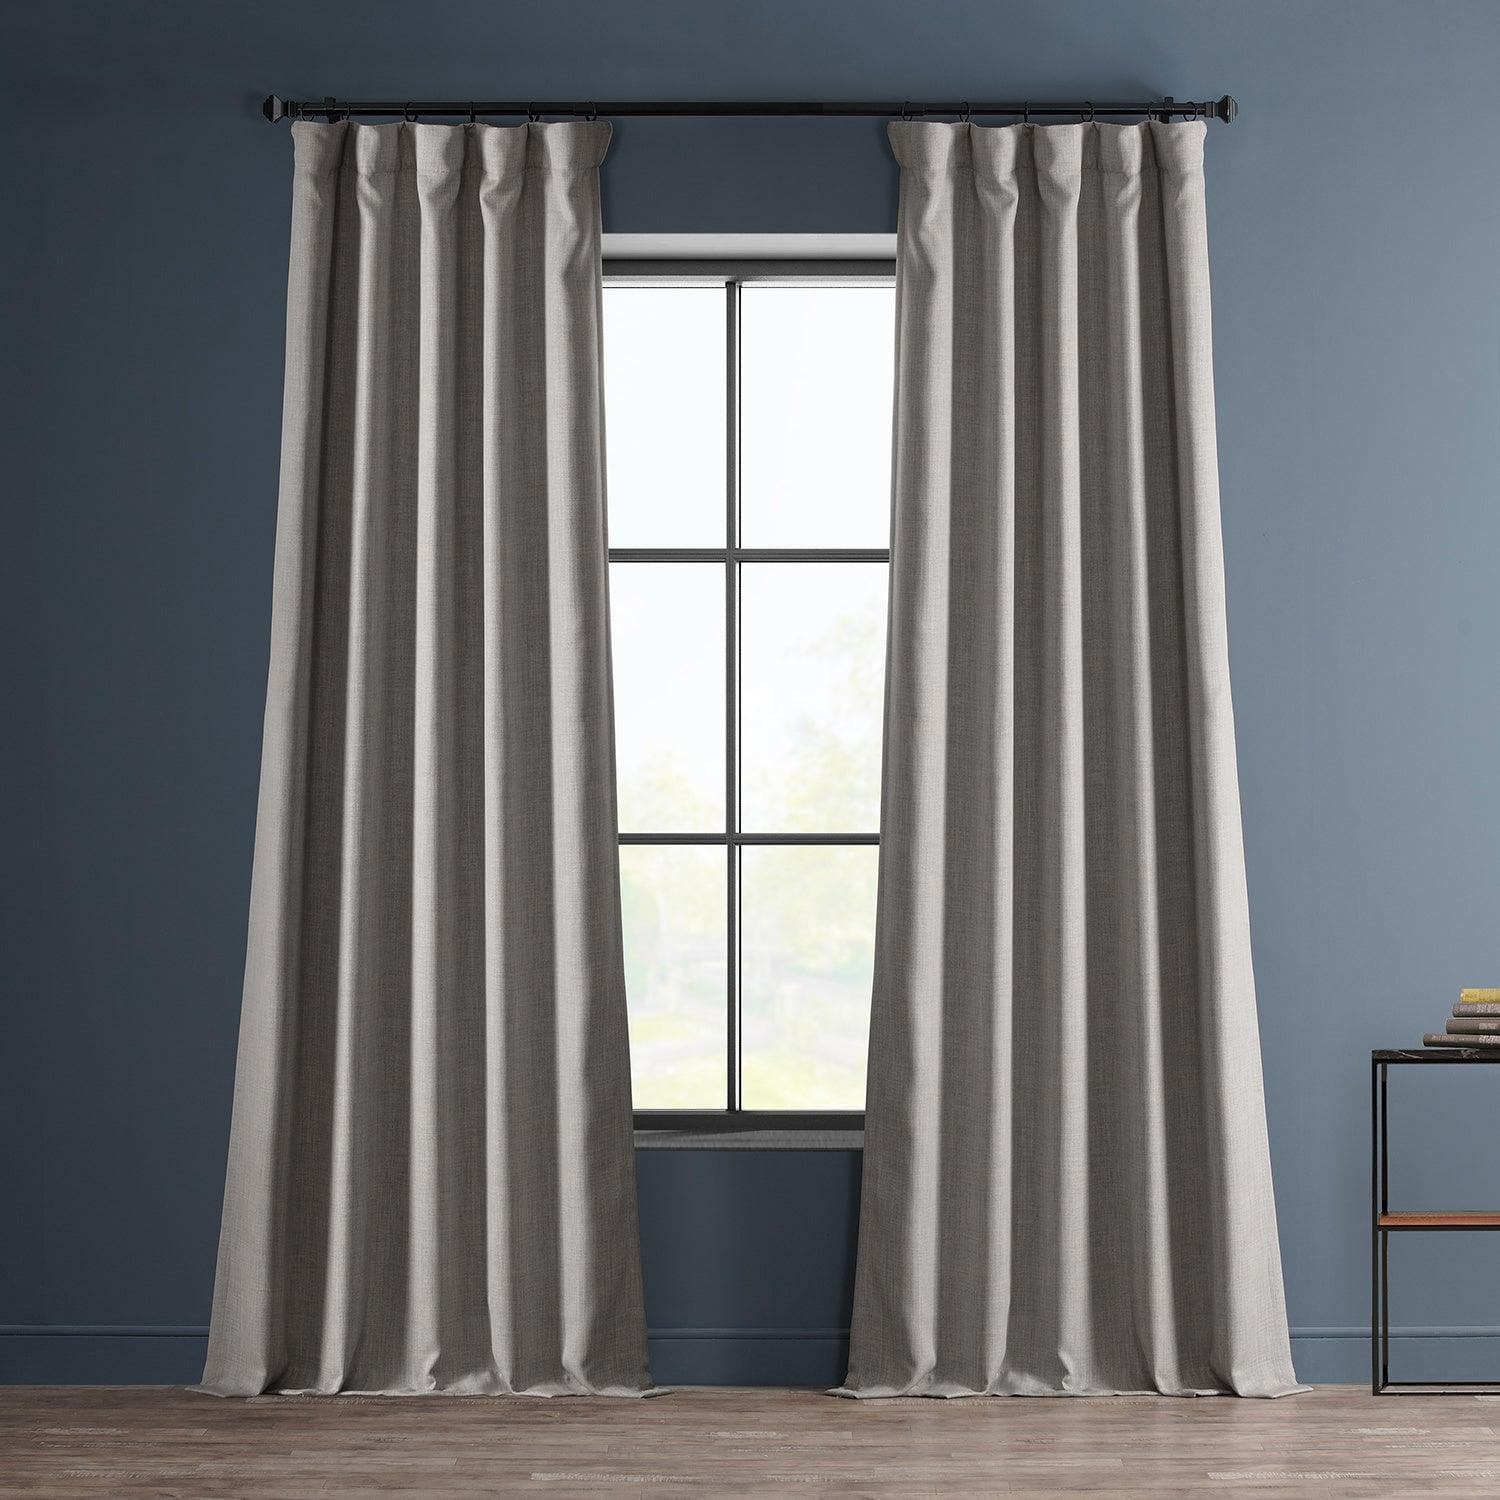 Pencil Pleat Linen Curtain Panel - Heading for Rings and Hooks - Unlined Linen Privacy Curtain